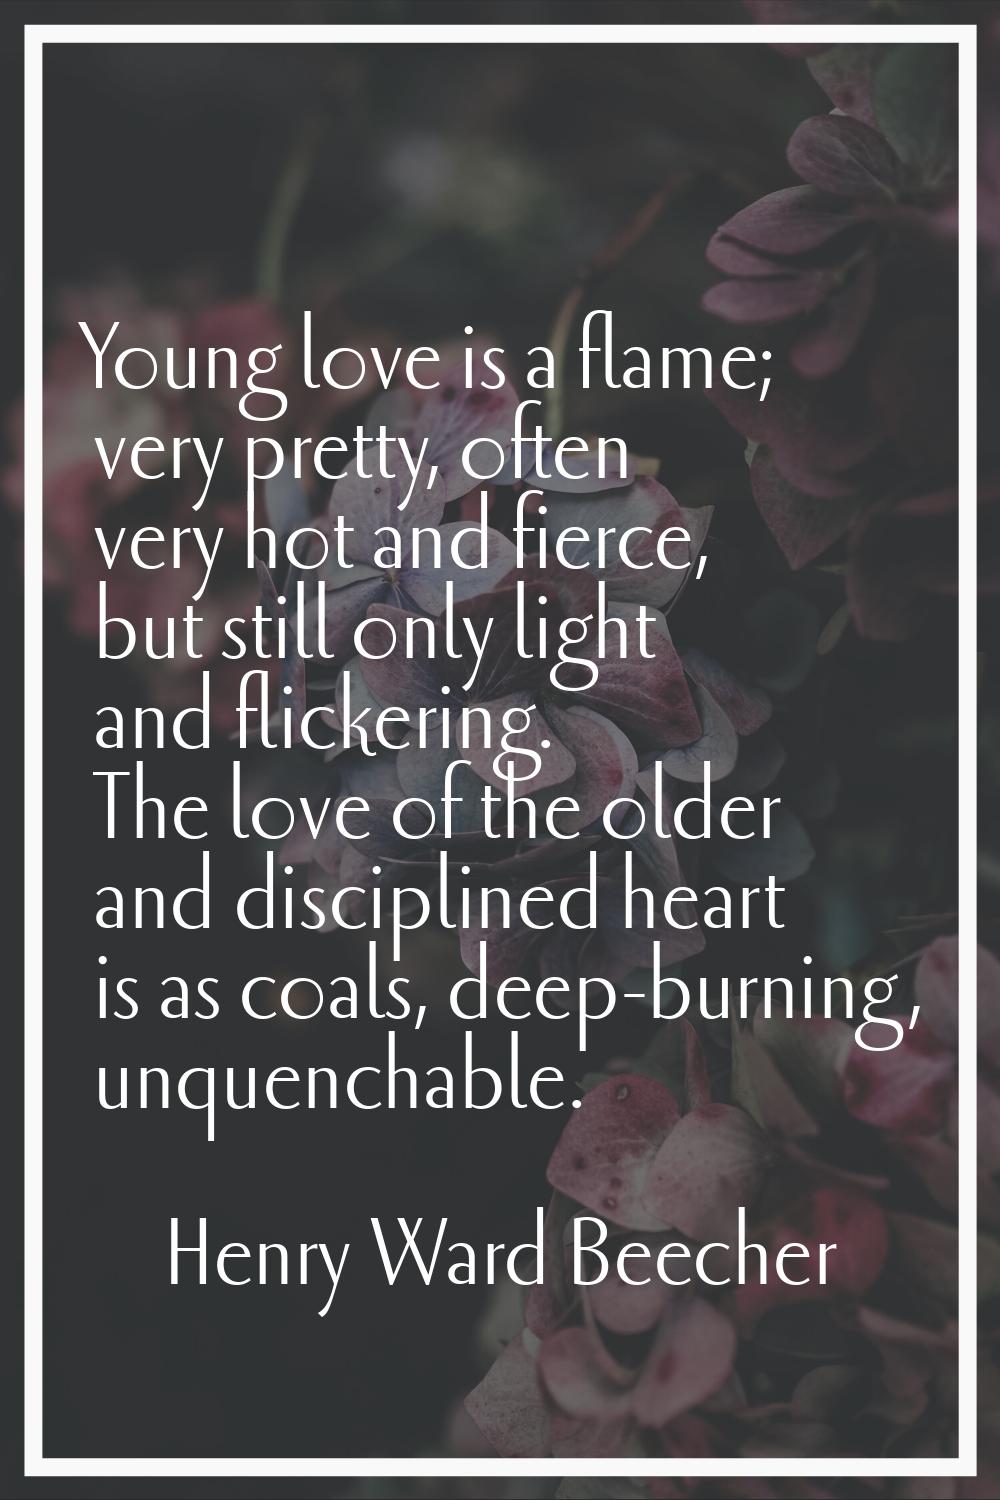 Young love is a flame; very pretty, often very hot and fierce, but still only light and flickering.